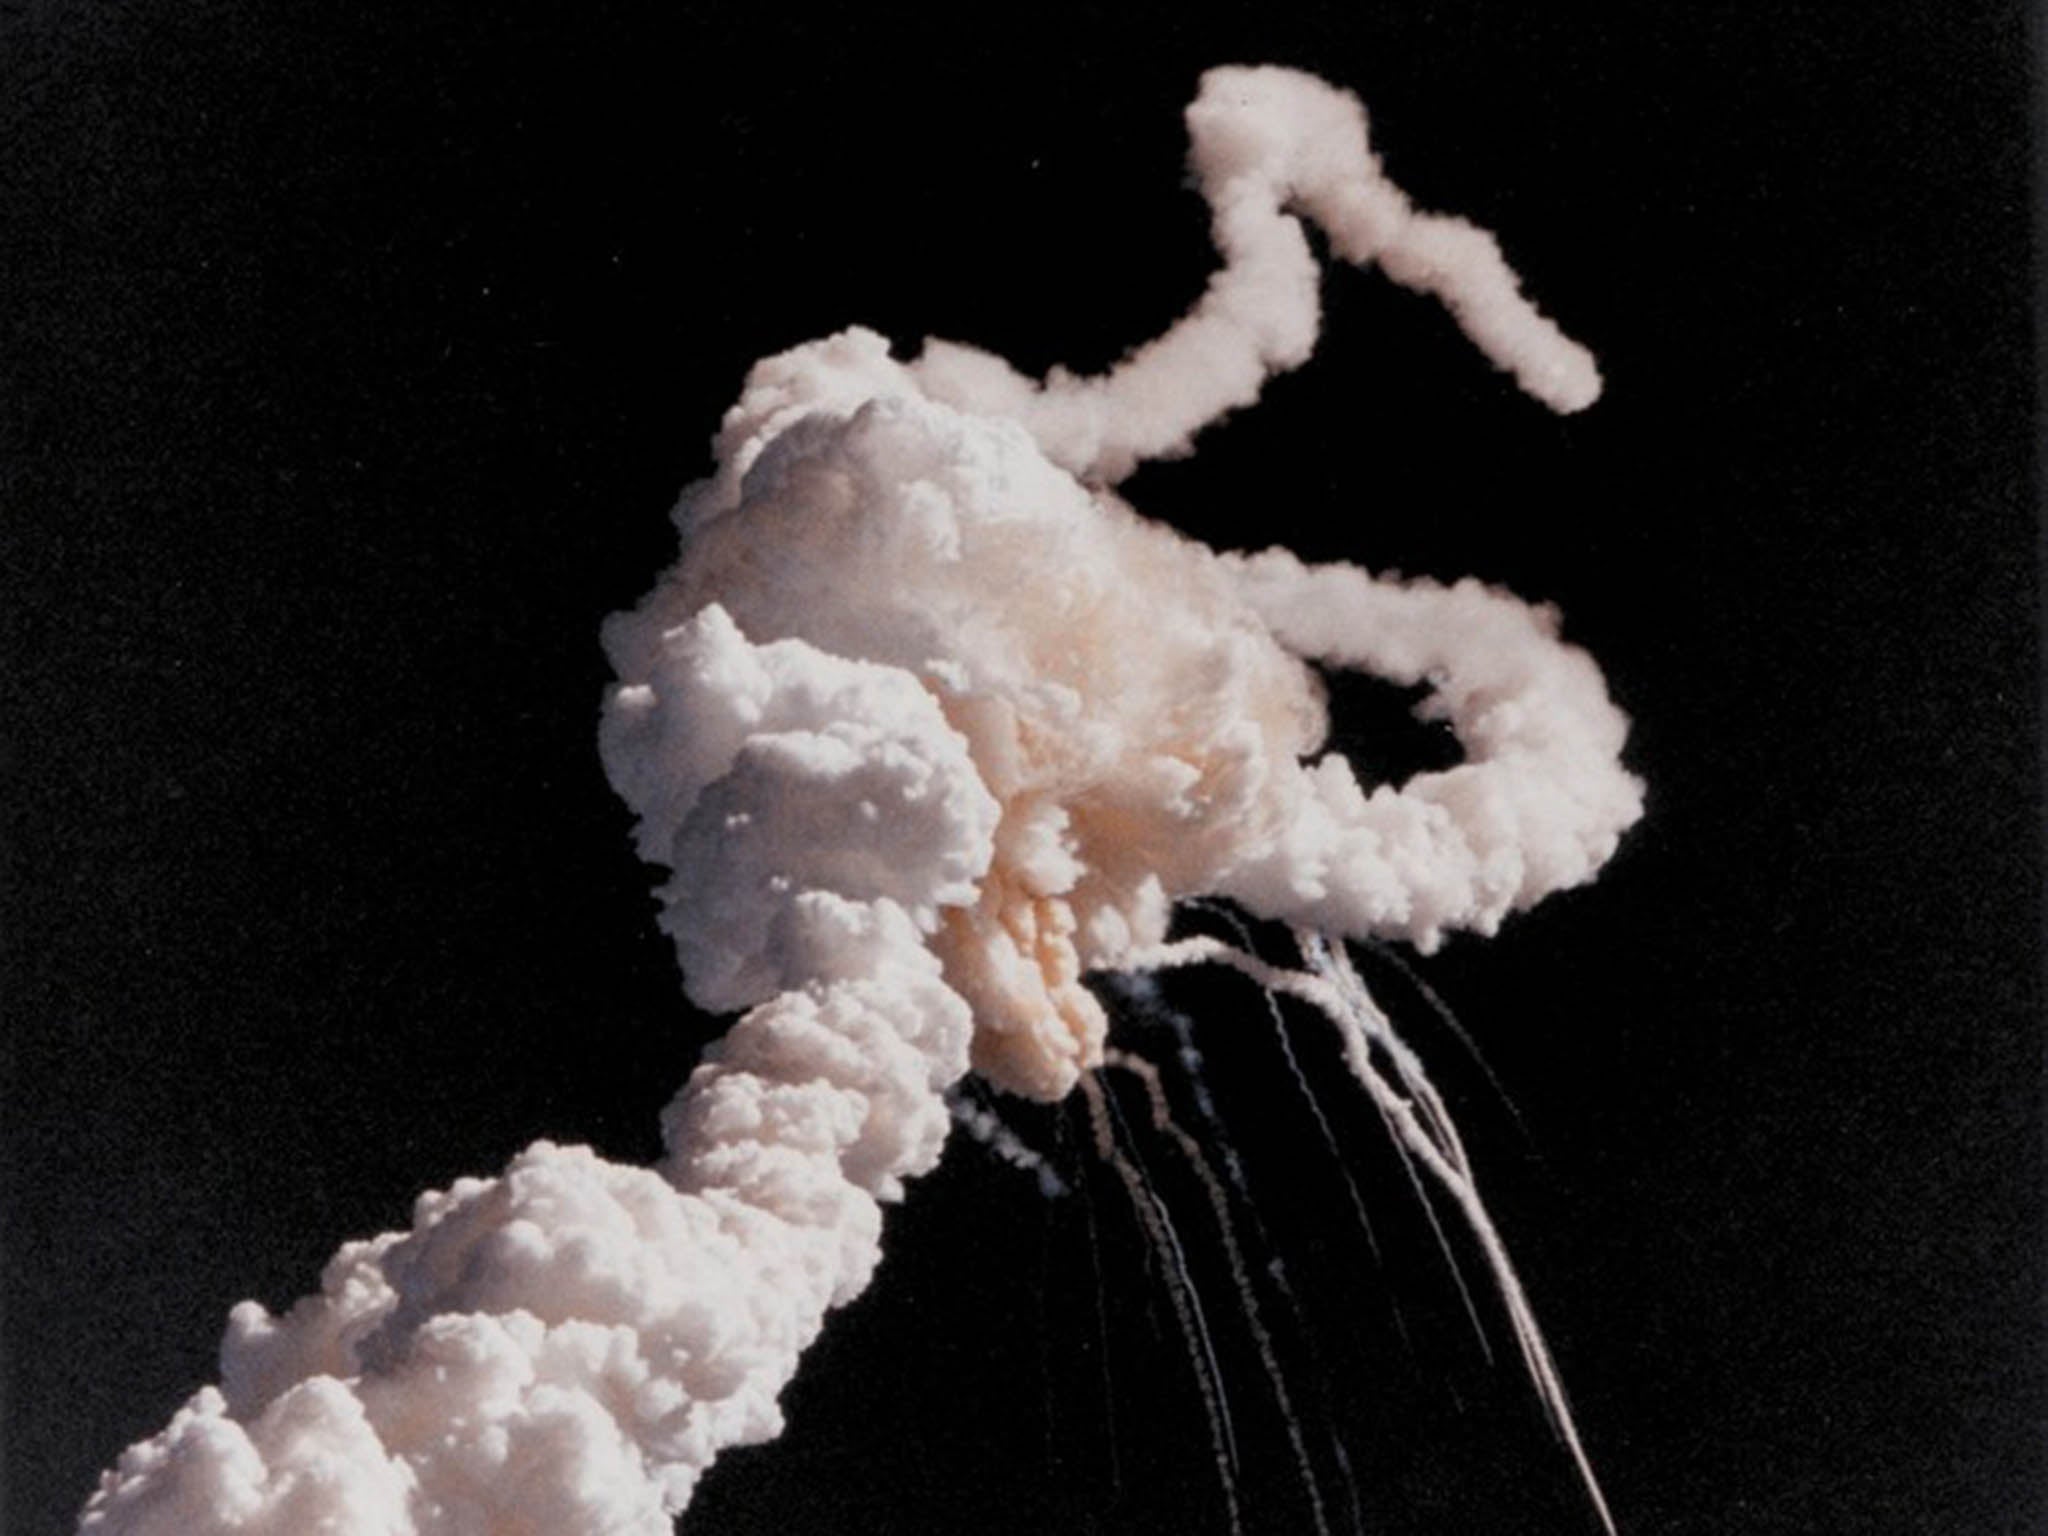 The 1986 Challenger disaster made Nasa review their safety practices